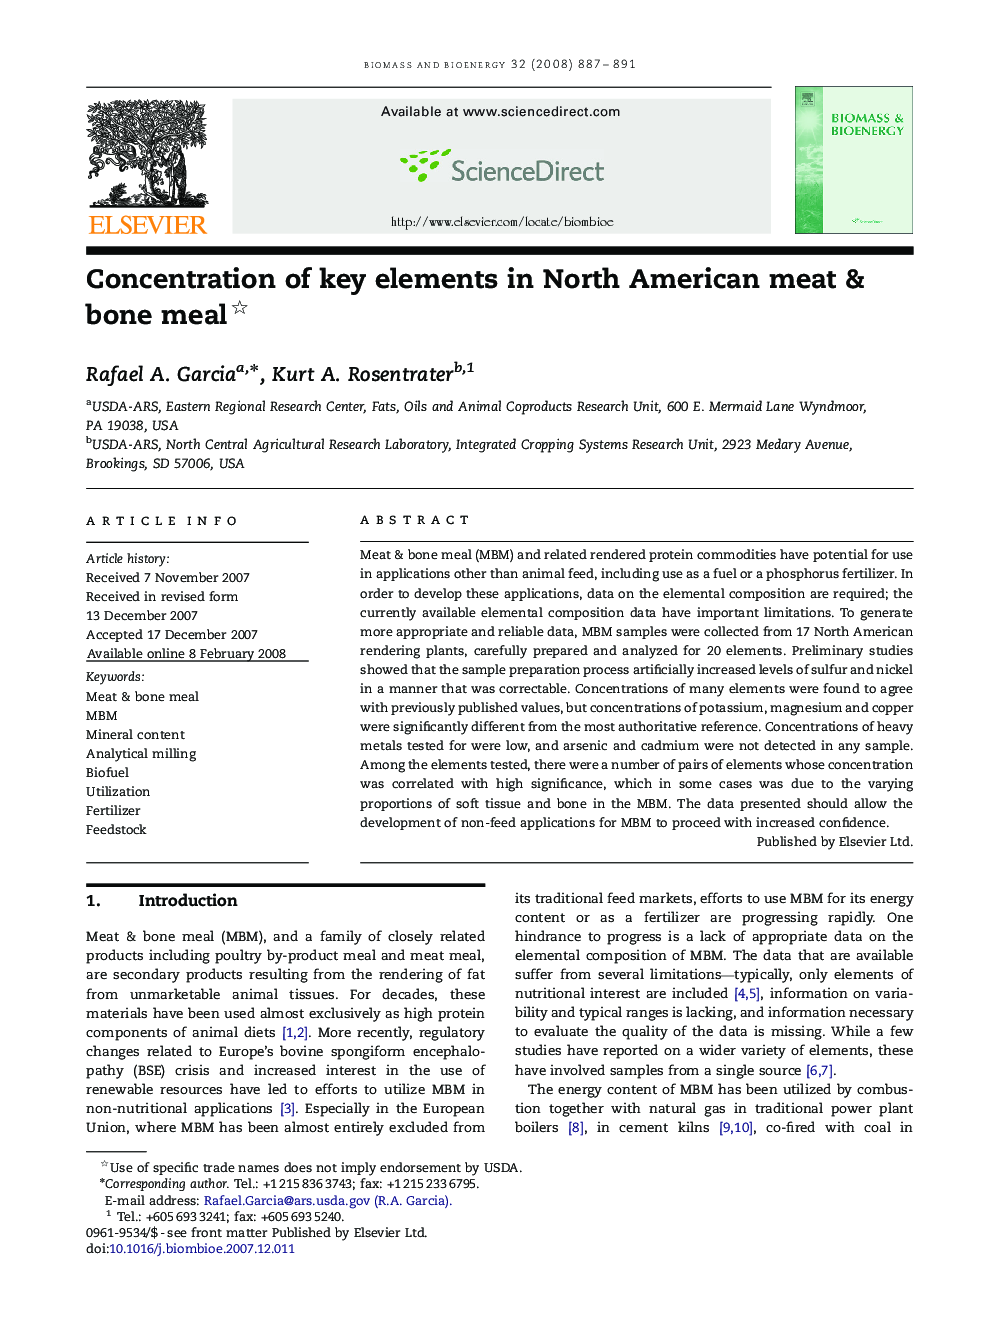 Concentration of key elements in North American meat & bone meal 